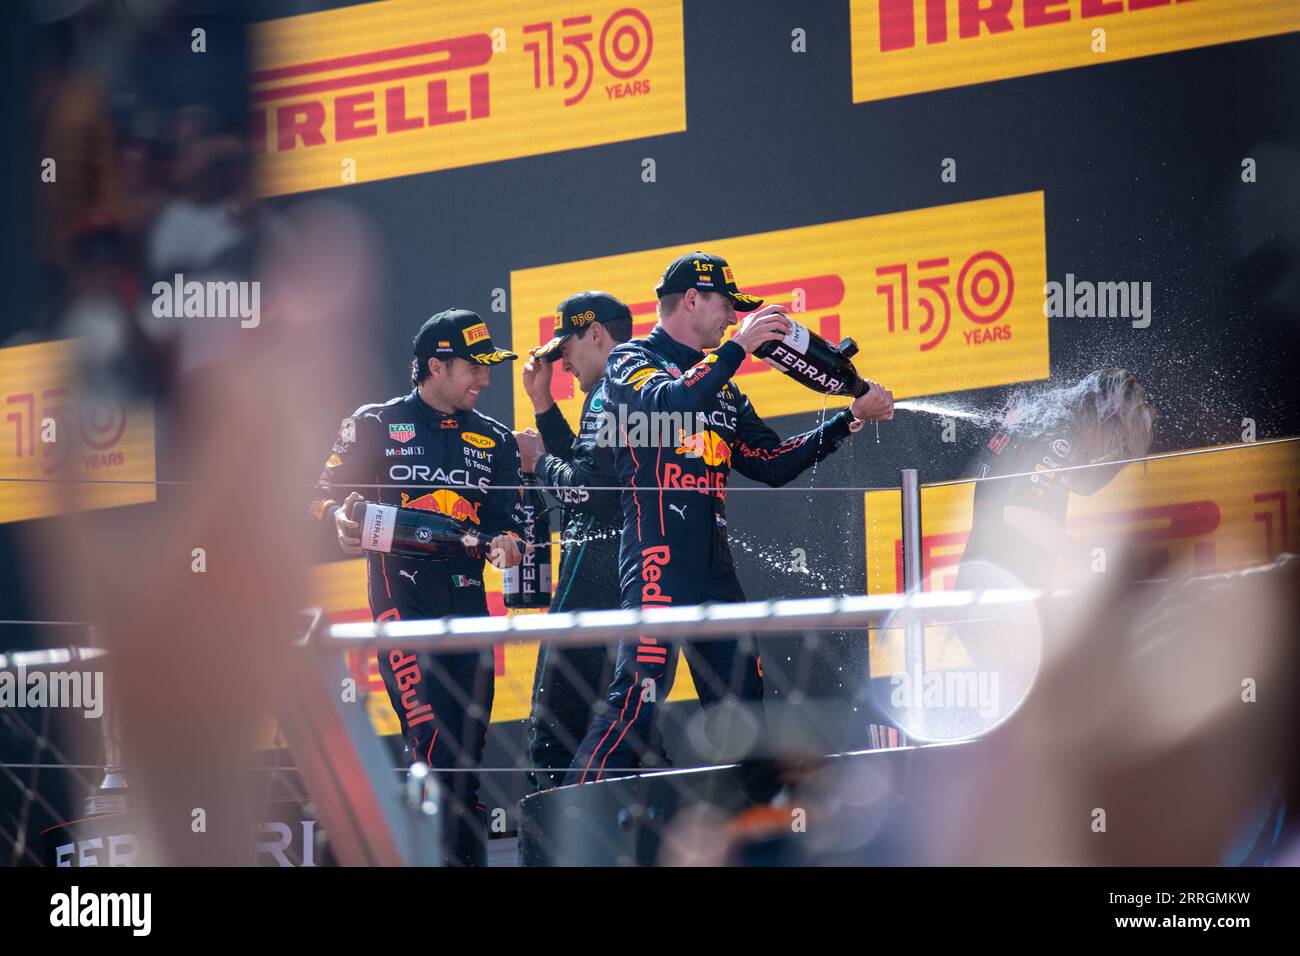 George Russell, Max Verstappen, and Sergio Perez in jubilant celebration, spraying champagne after their victories at the Spanish Grand Prix. Stock Photo